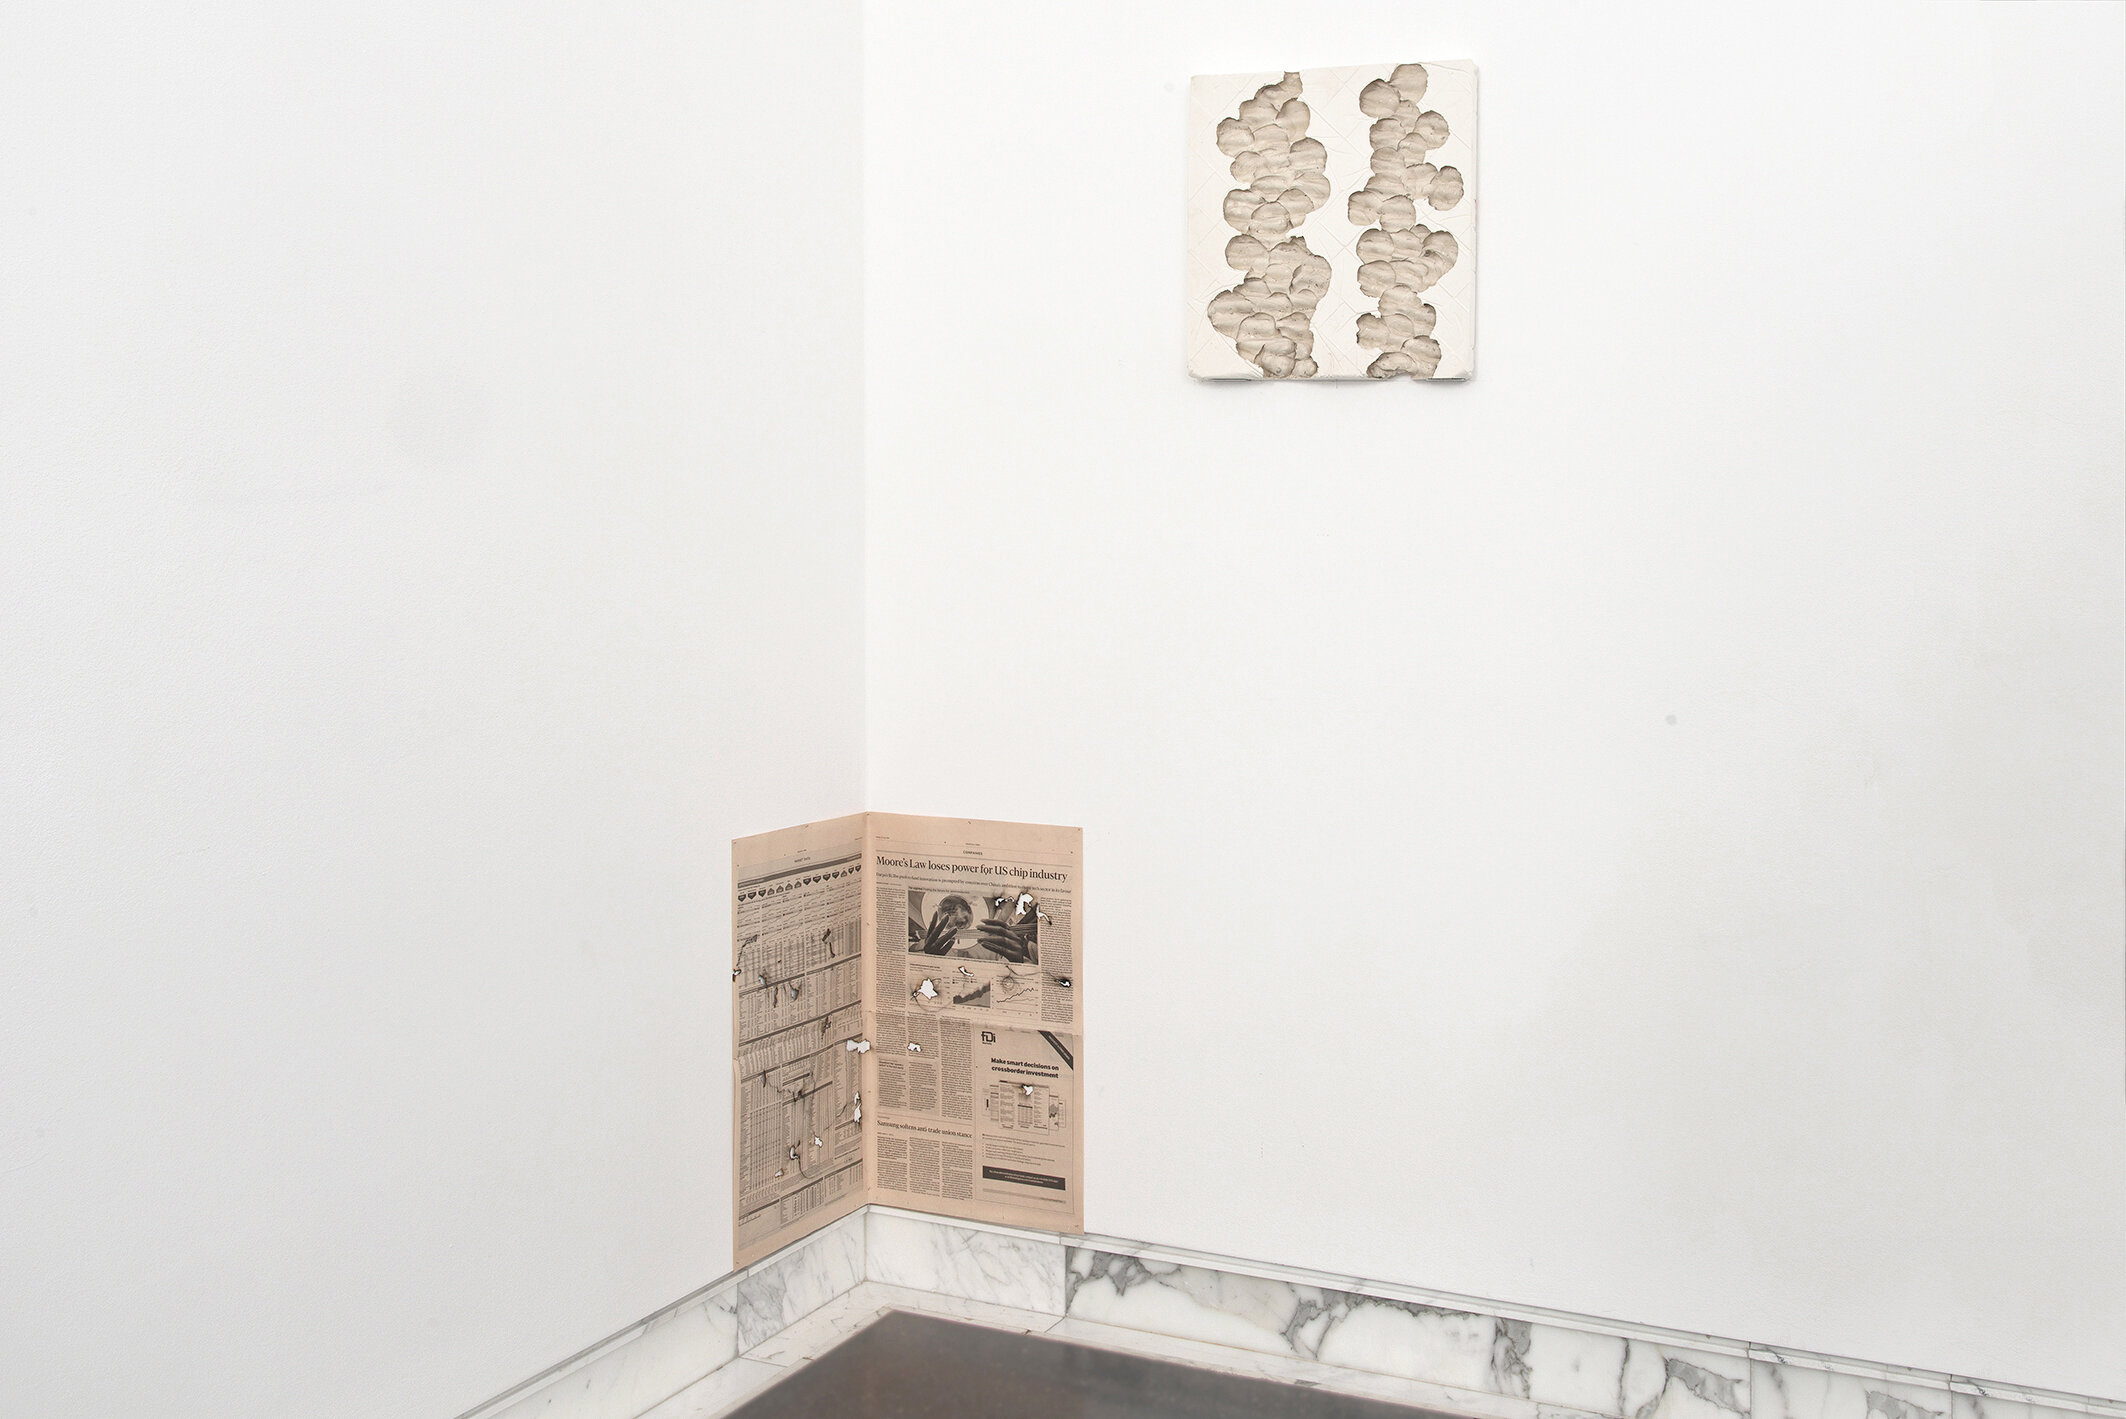   Daily Sketches, Financial Times #5 , newspaper, nails, 60cm x 50cm ;  Gypse Riverbed (White Smoke) , plaster, unfired clay, 38cm x 40cm x 4cm, 68projects, Berlin, Germany, 2018 